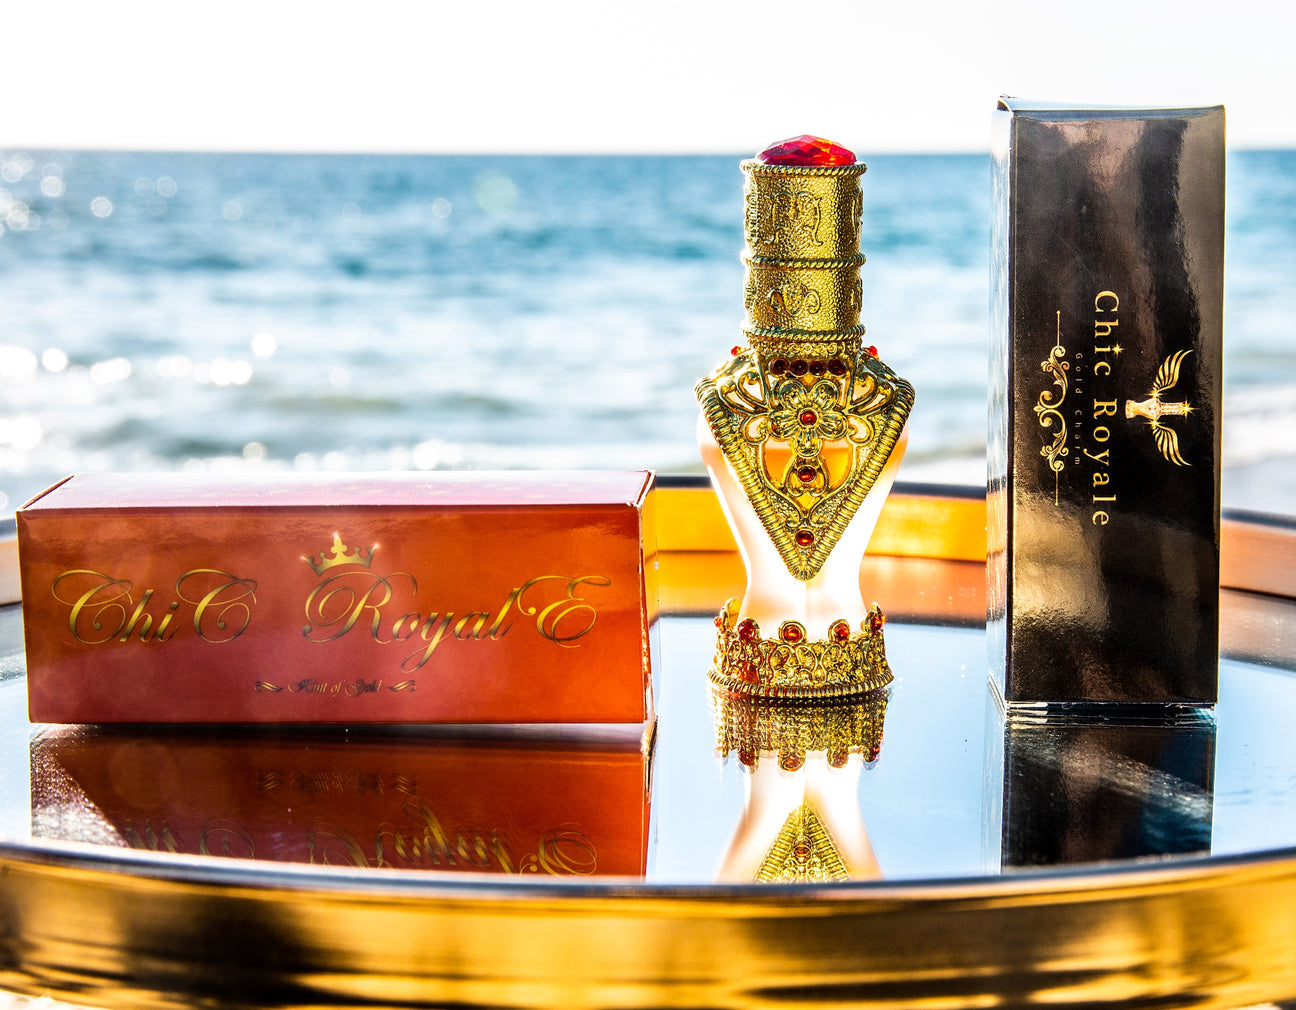 Chic royale Men AND Ladys Perfume